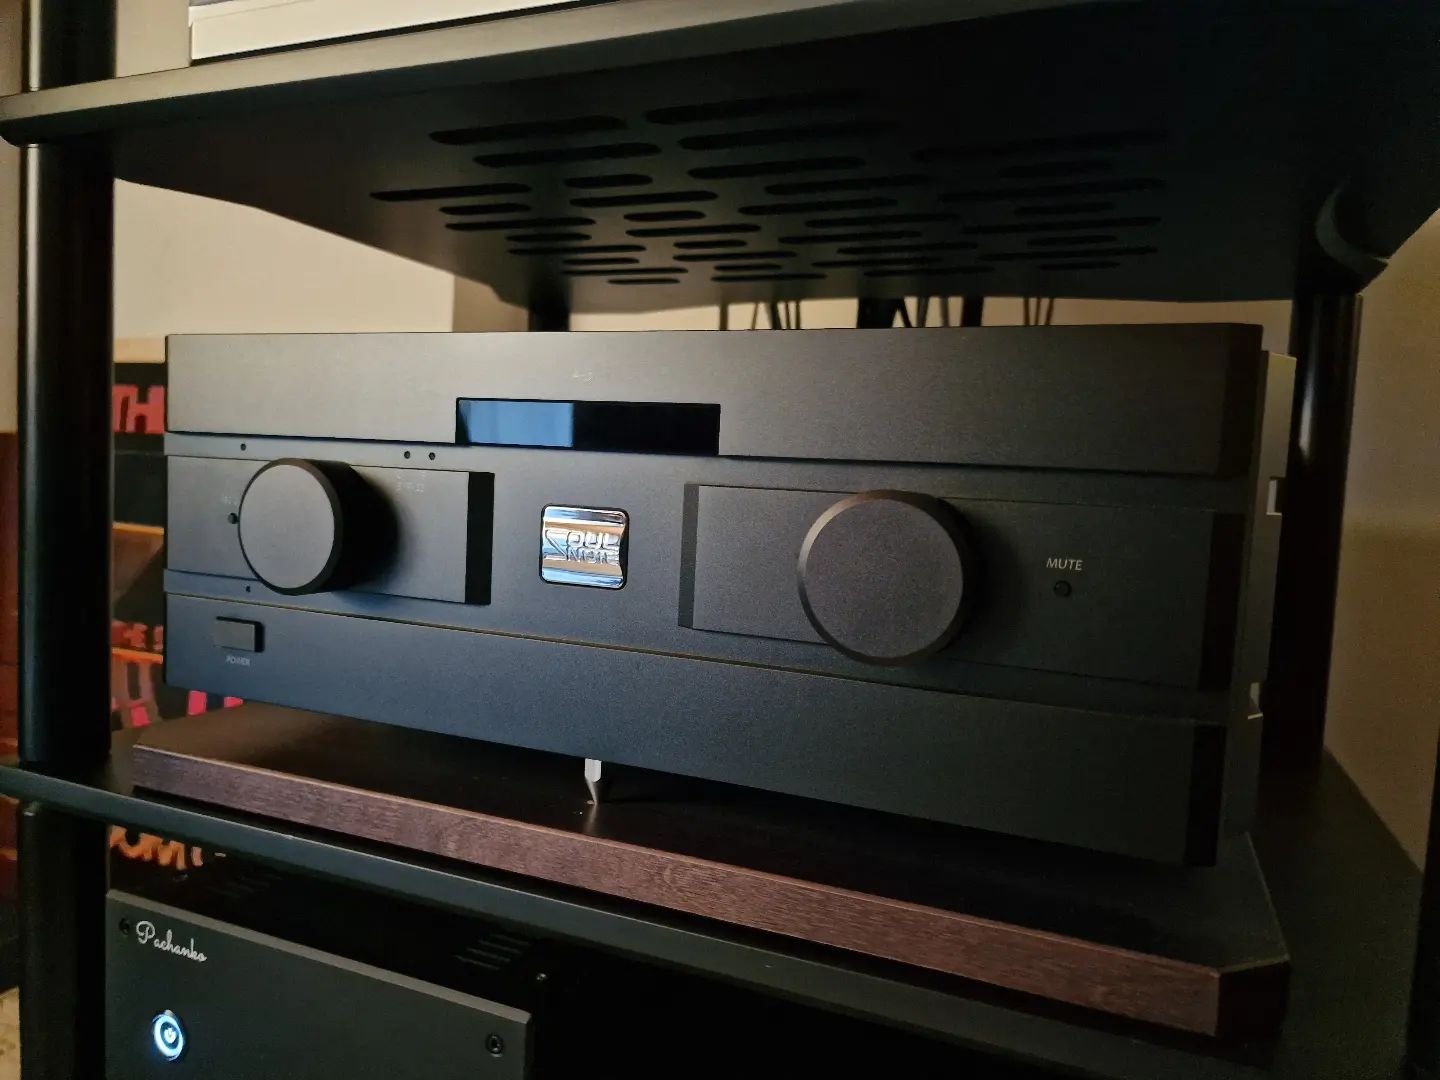 The @soulnote3 A-3 integrated amplifier is the kind of amplifier I dreamed of when I set out on my audiophile journey in my late teens. It's everything any HiFi and music lover could ever want - a true end of the road component. If you're searching f